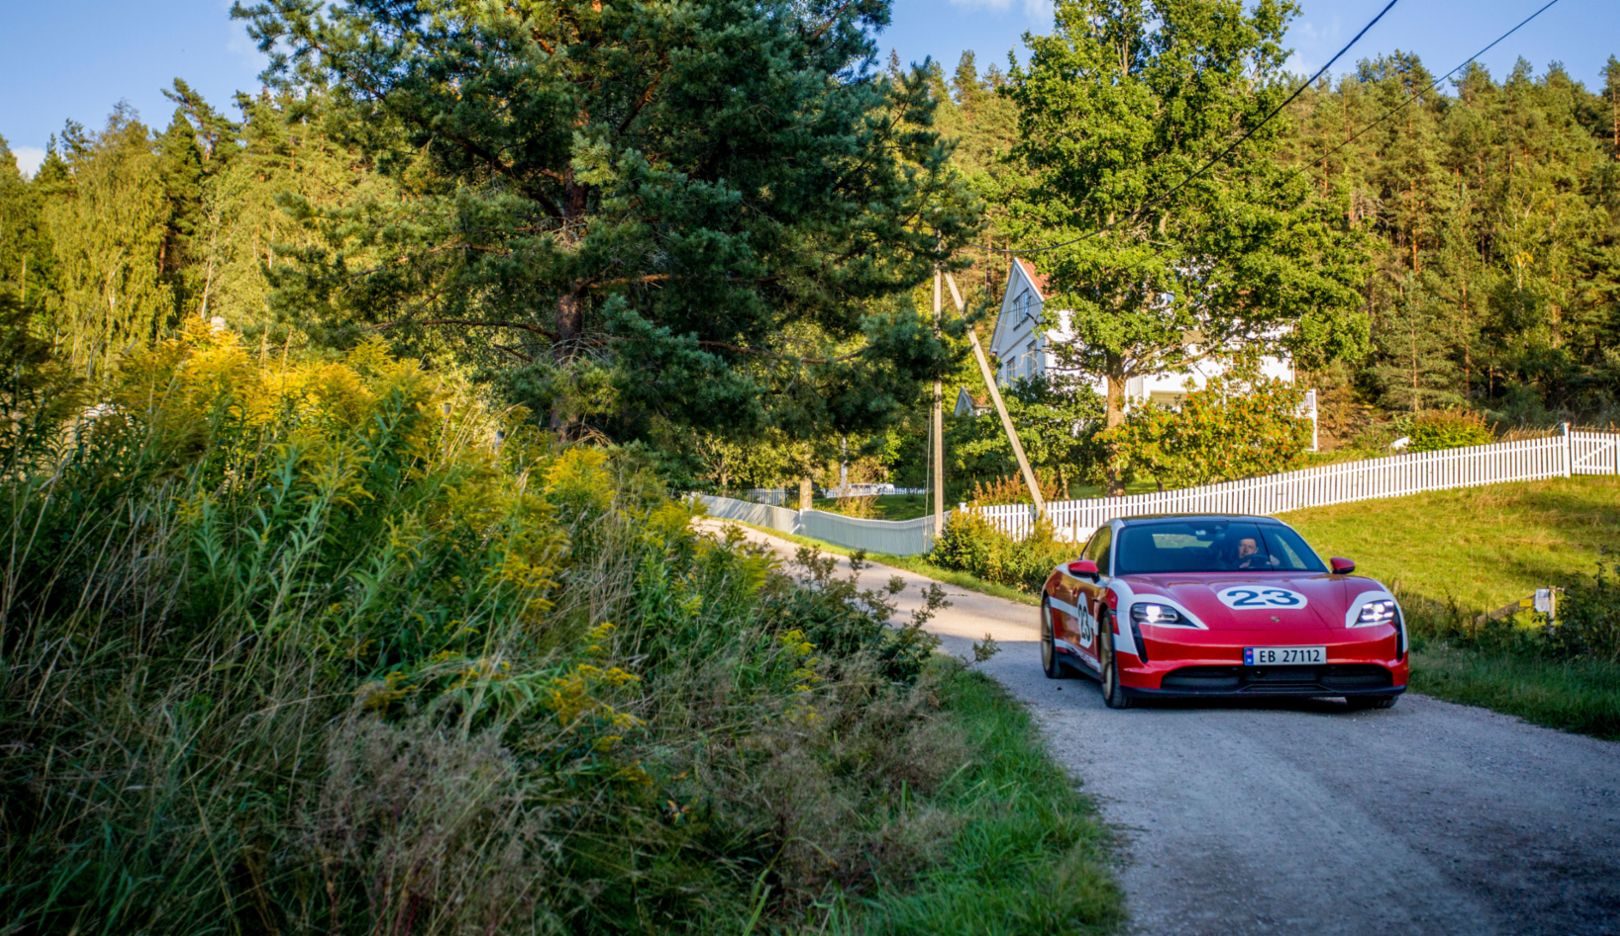 Quiet tones: The nature-loving musician enjoys going for drives in his Porsche Taycan 4S. “I’m learning to appreciate electric driving more and more. It is a positive development and one that is irreversible,” says Wongraven.